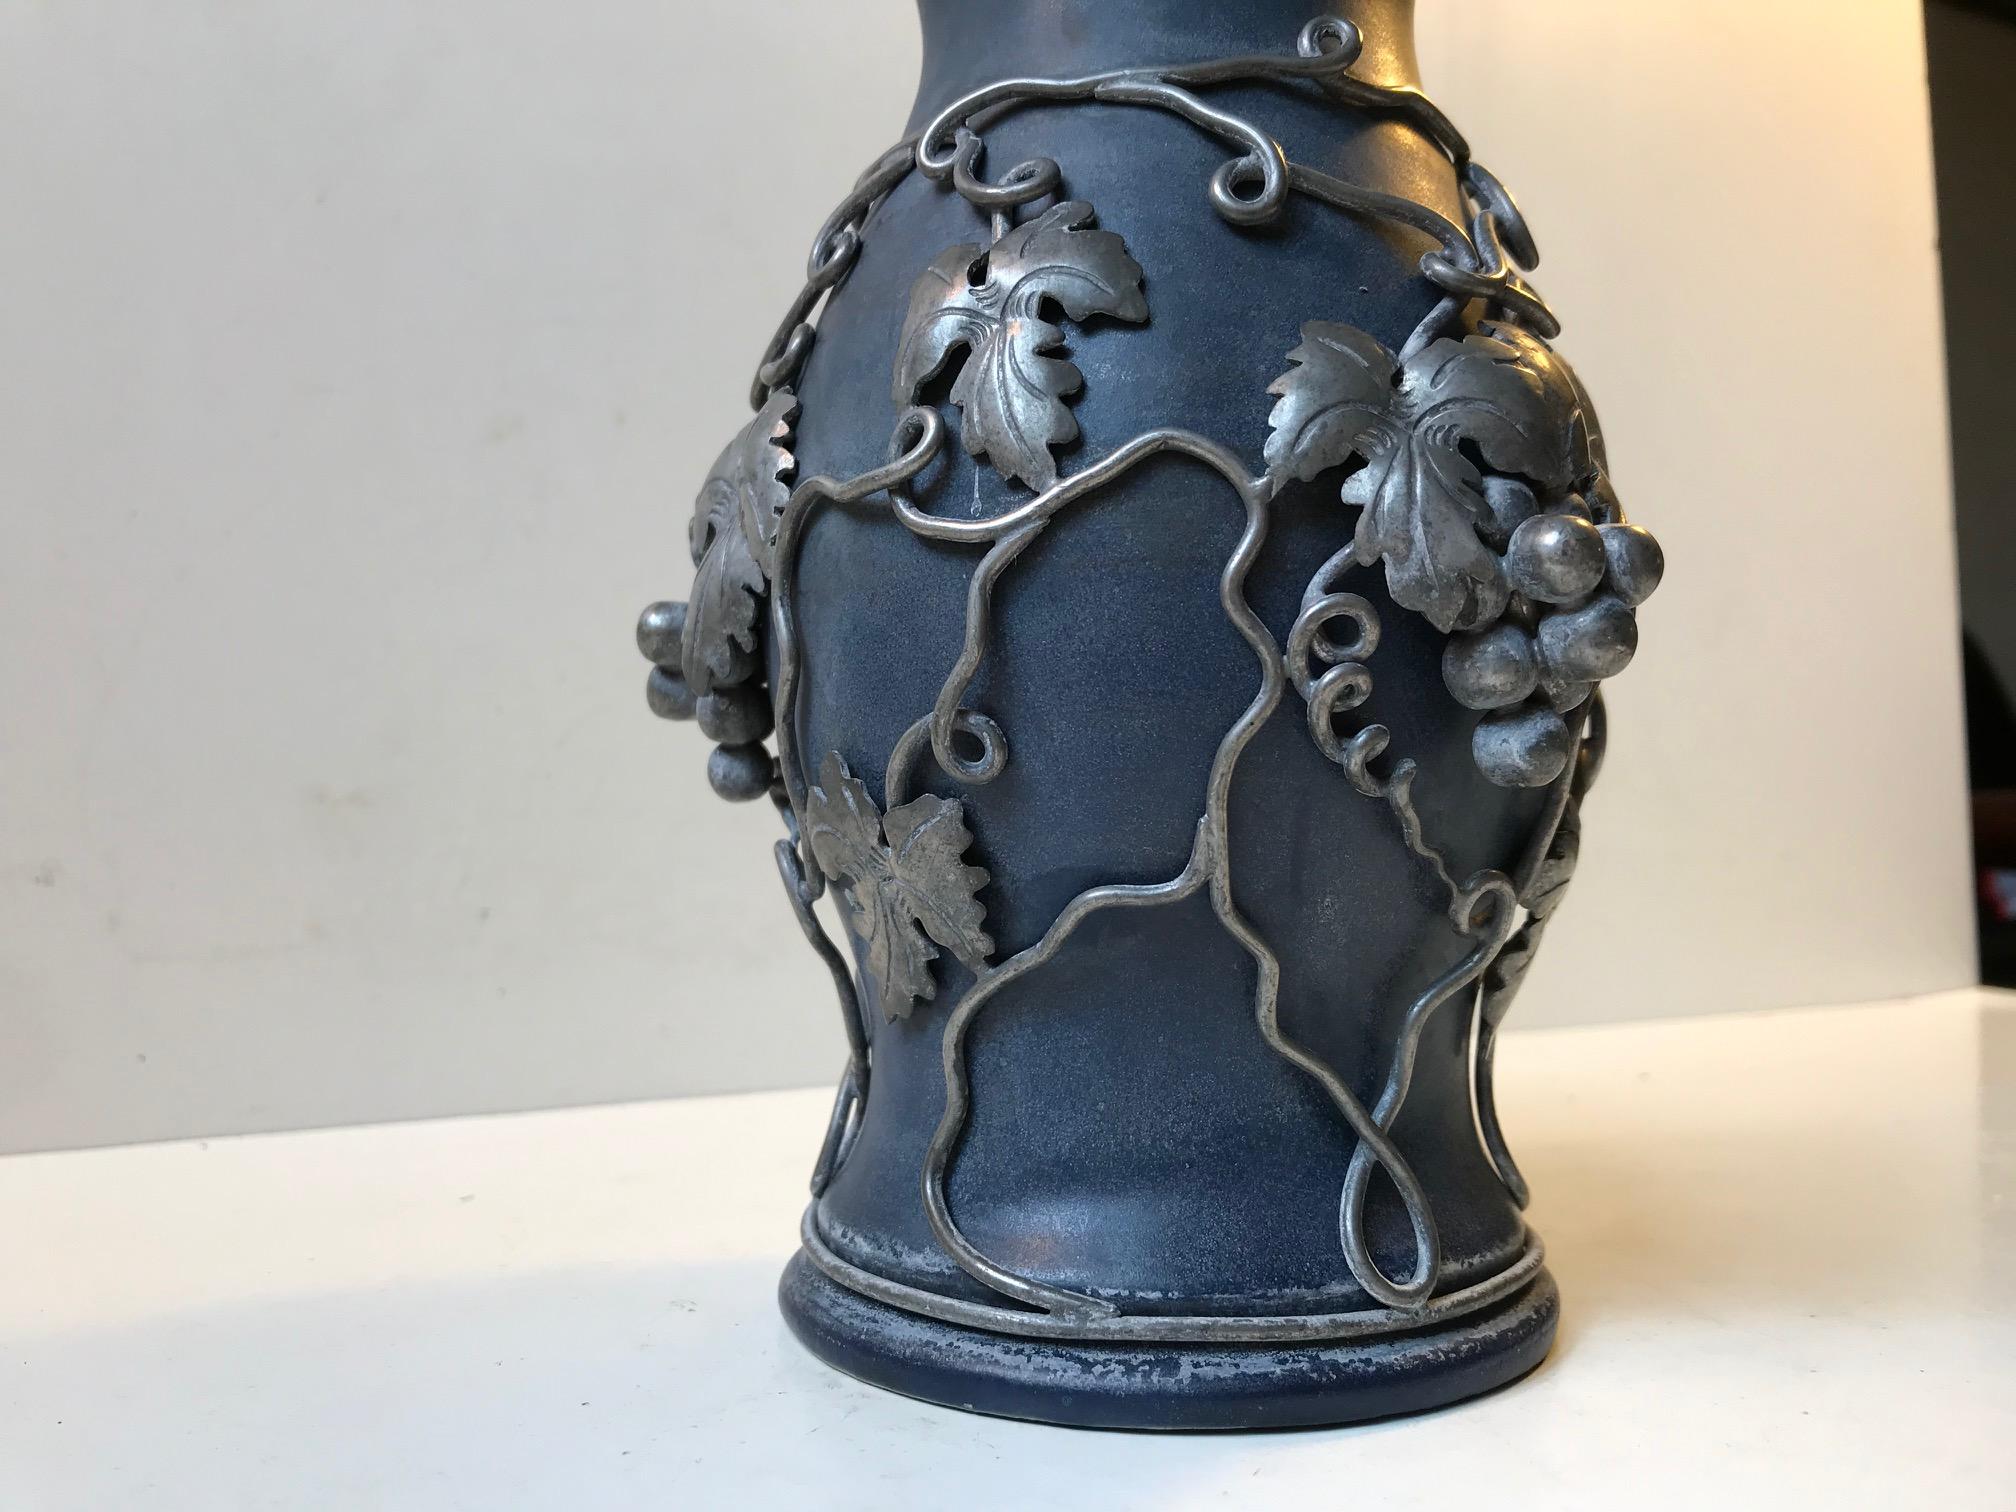 Art Nouveau vase with dark slightly matte 'blueberry' colored glaze and handmade grape ornamentation in pewter. Anonymous French ceramist circa 1900-1900s. It is signed indistinguishable.